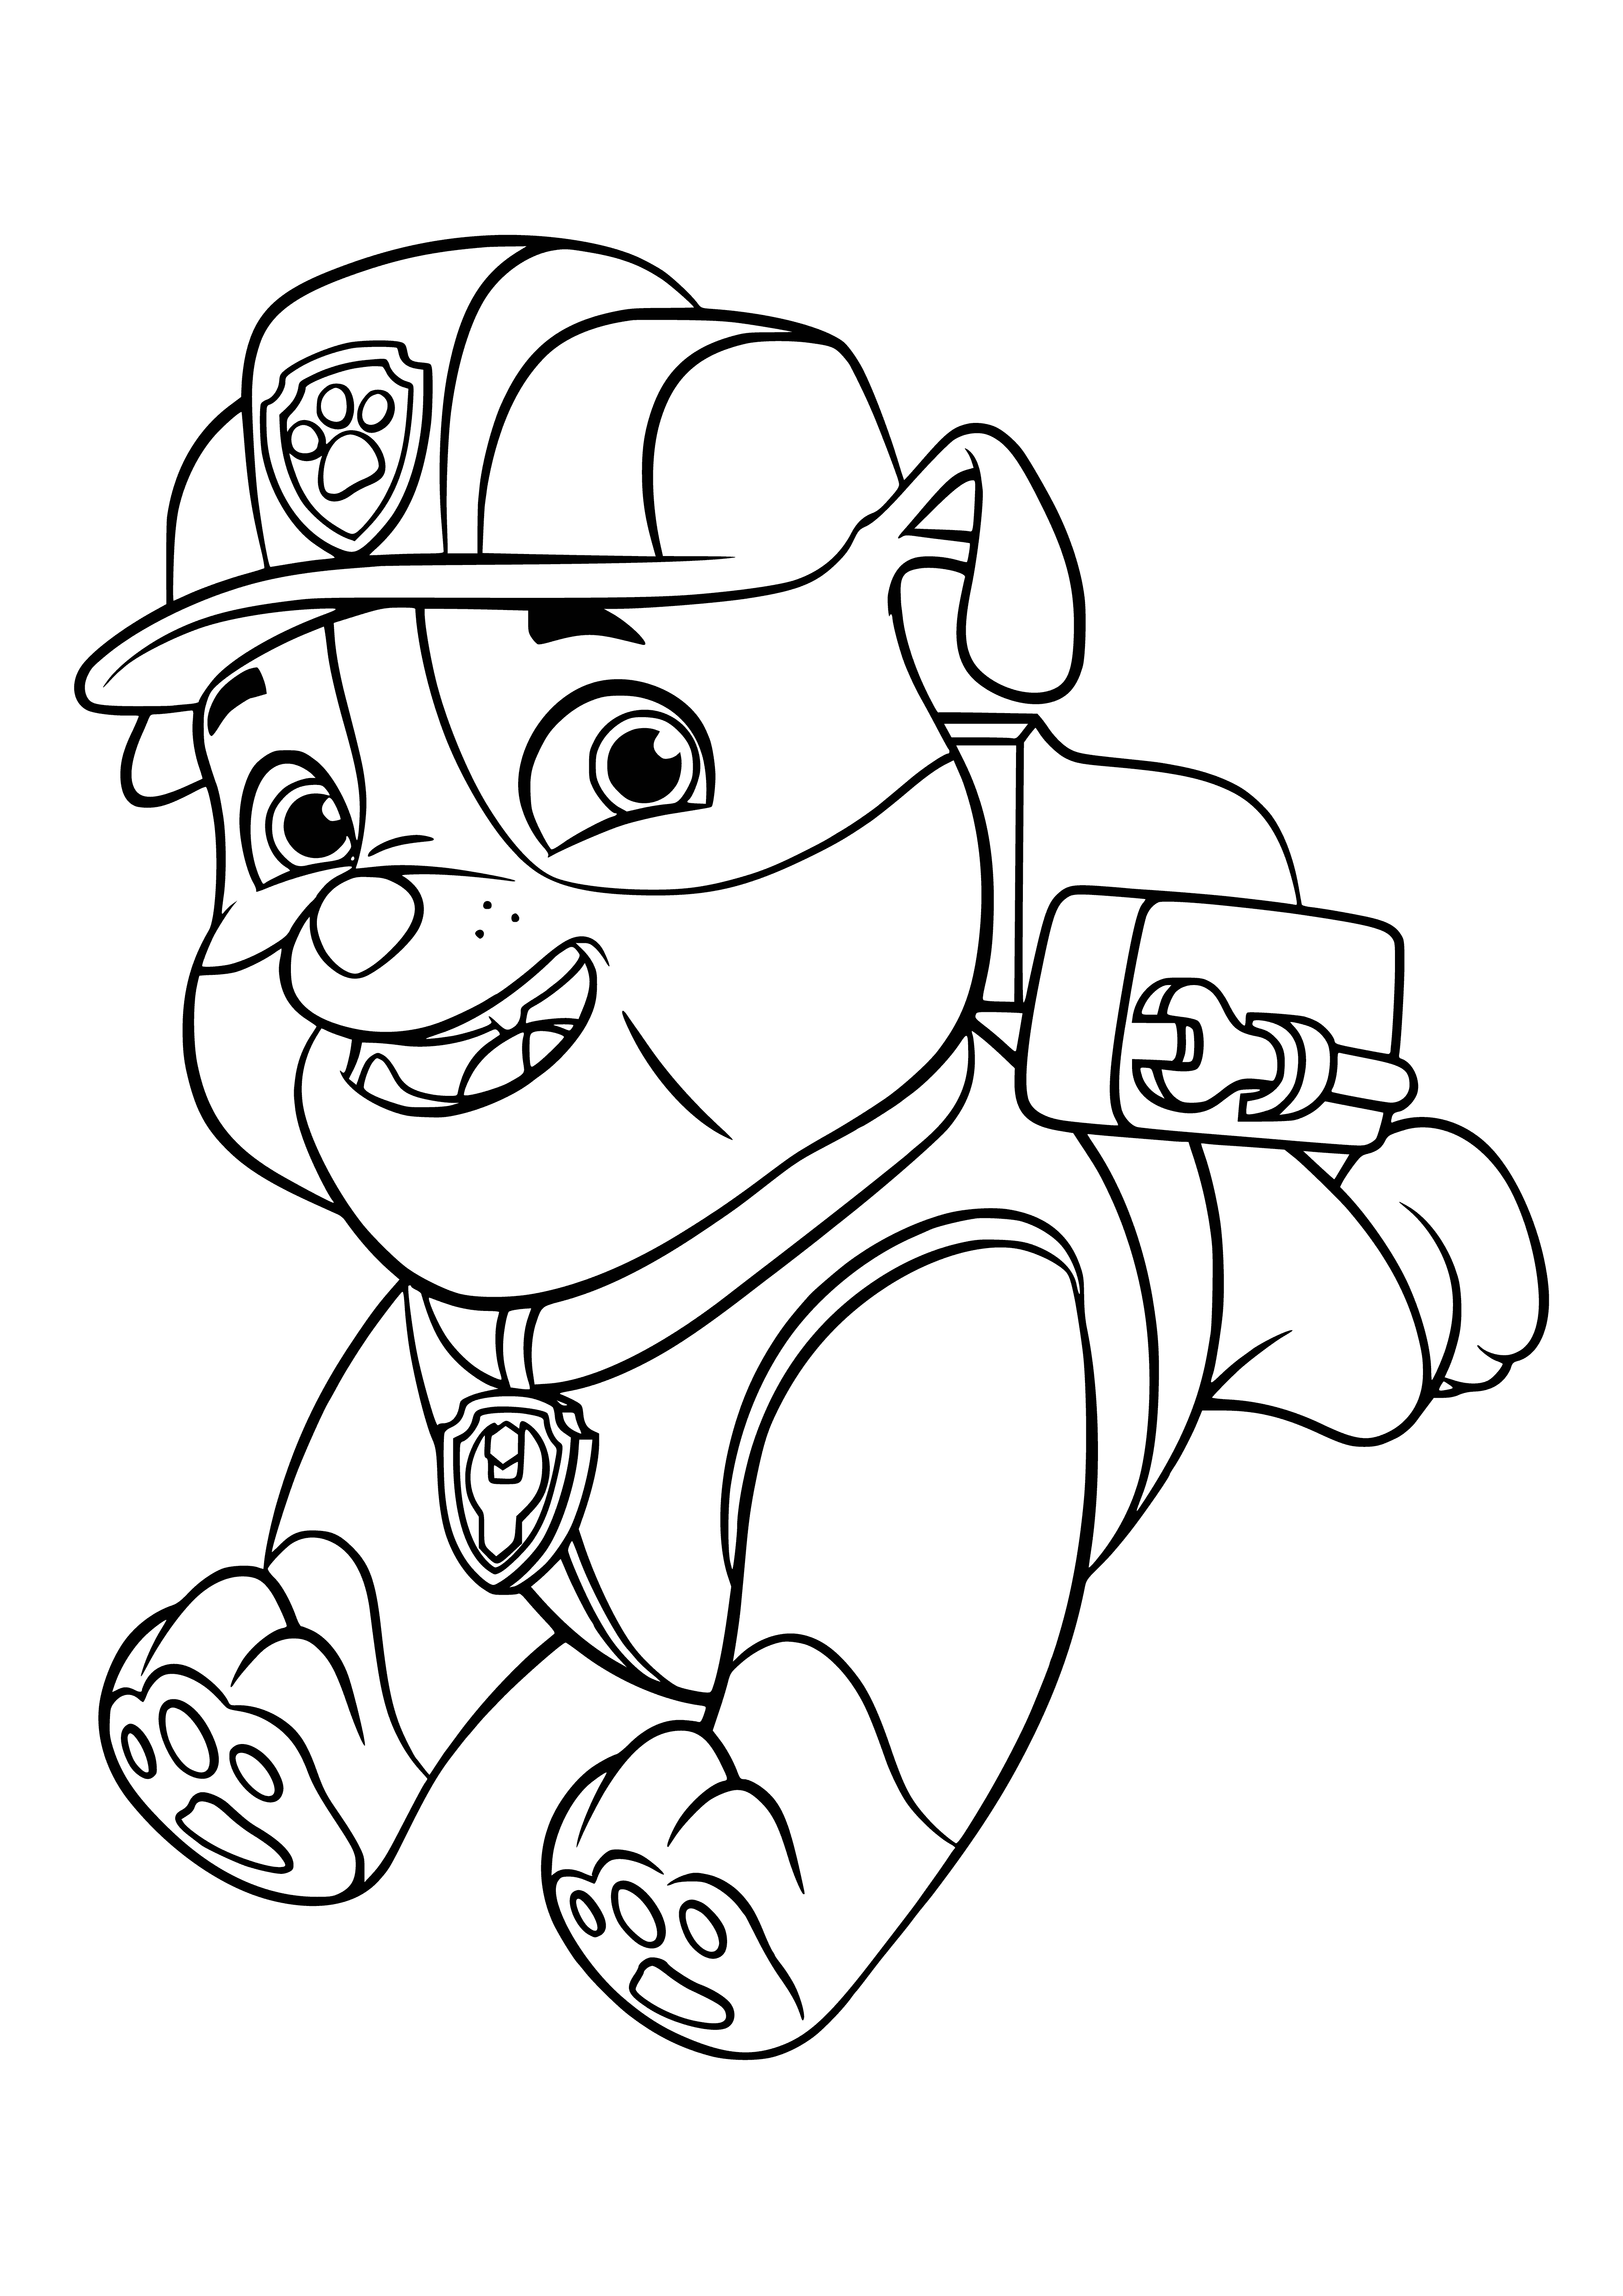 coloring page: The PAW Patrol is a team of anthropomorphic animals led by Ryder, saving the day in Adventure Bay! #PAWPatrol